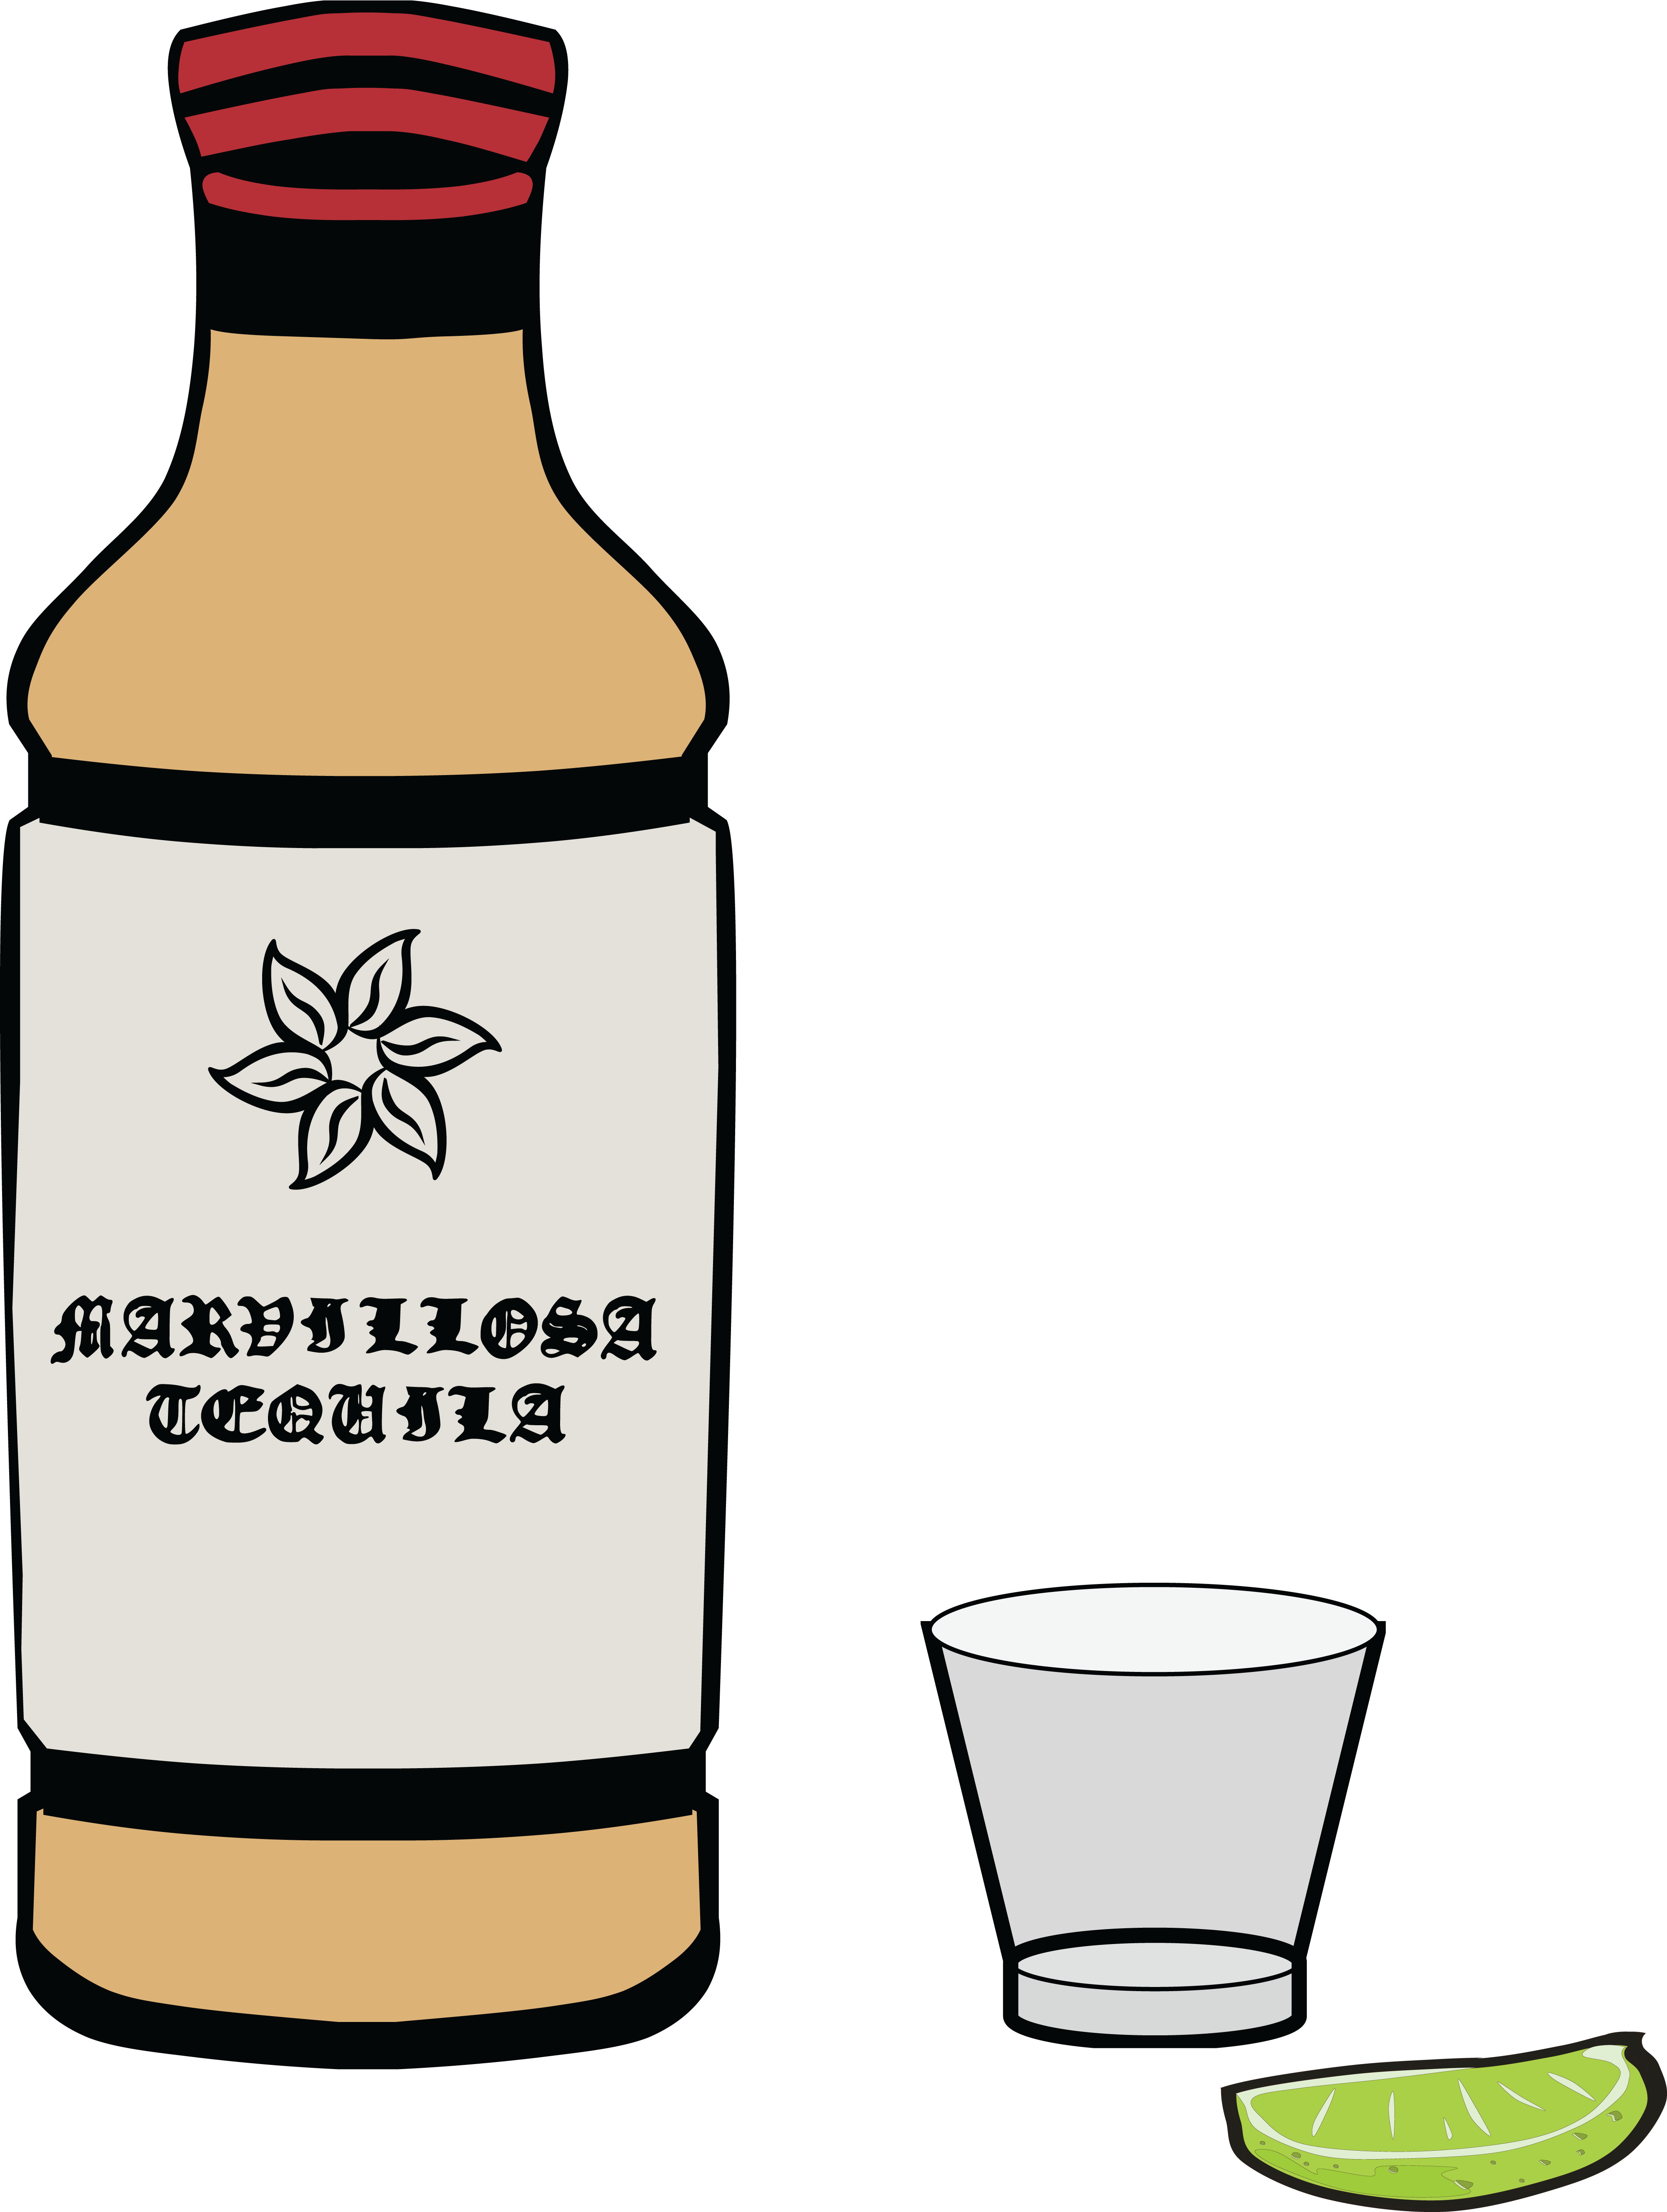 Free Clipart Of A Bottle Of Tequila - Tequila (4000x5308)